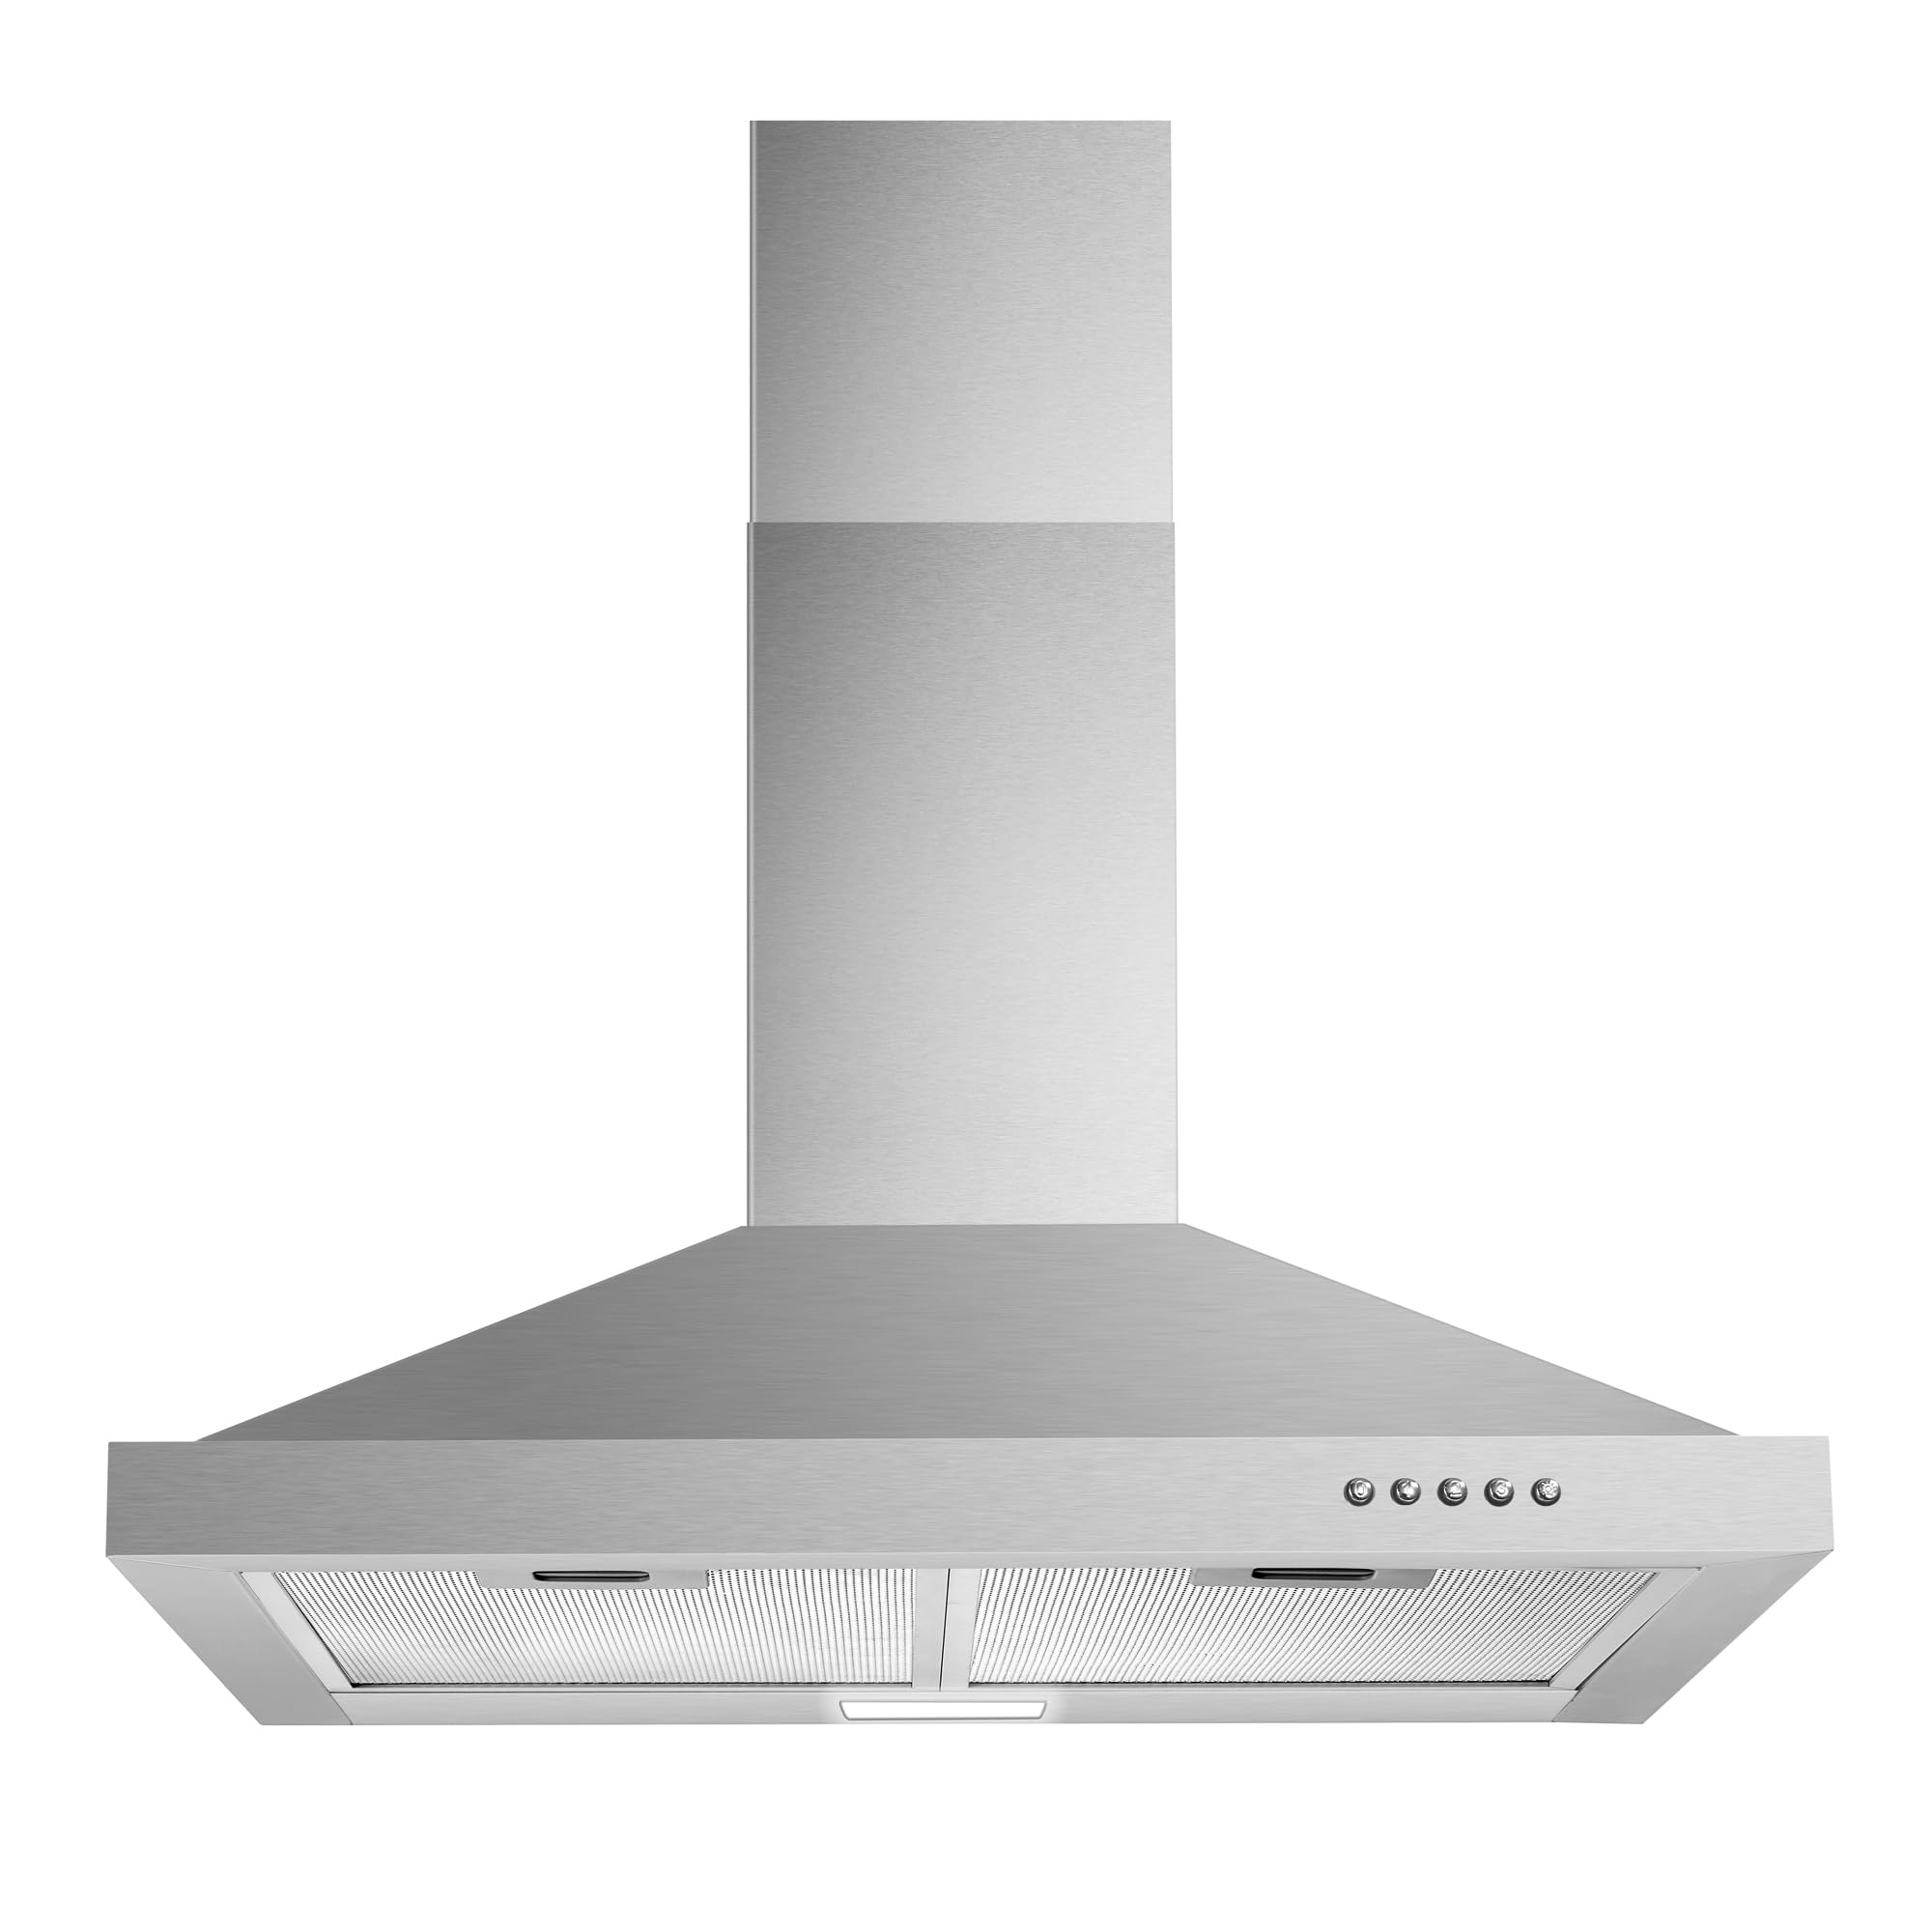 Tieasy Wall Mount Range Hood 30 inch with Ducted/Ductless Convertible Duct, Stainless Steel Chimney-Style Over Stove Vent Hood with LED Light, 3 Speed Exhaust Fan, 450 CFM